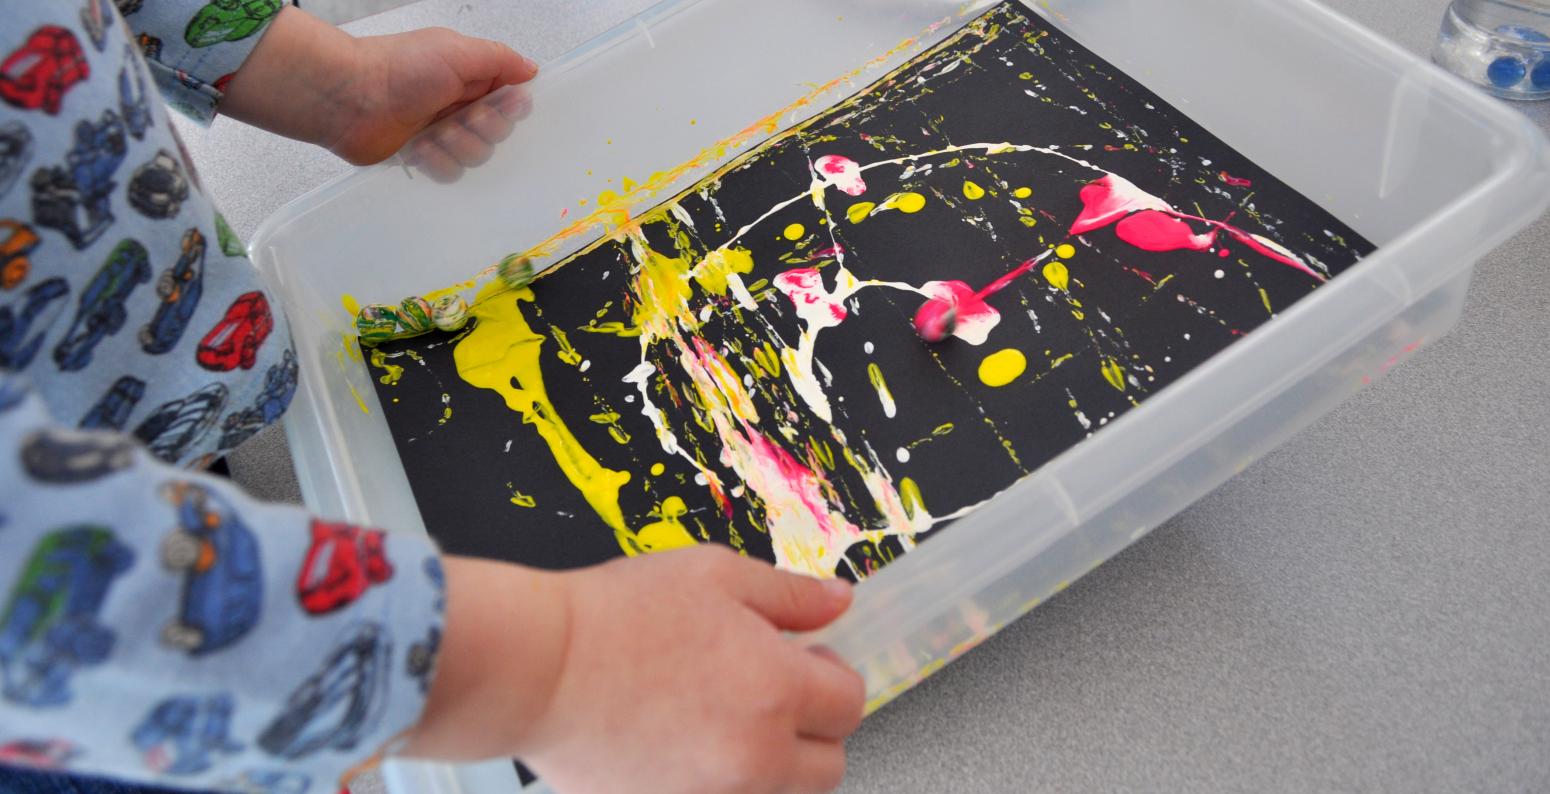 A toddler moving a plastic bin around with a painty marble and black paper inside, creating a colorful print.